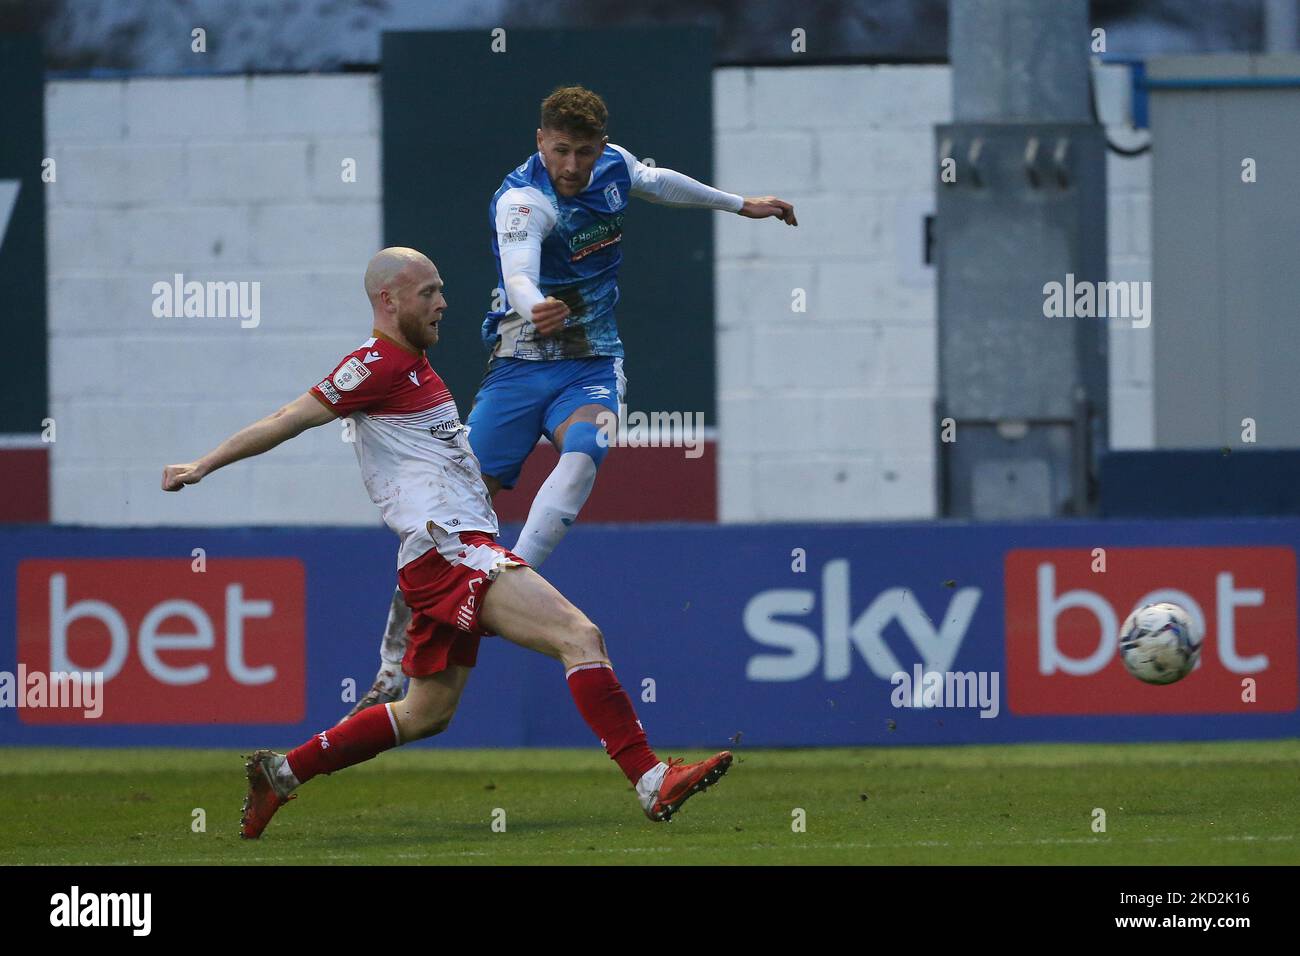 Stevenage's Scott Cuthbert blocks a cross from Barrow's Patrick Brough during the Sky Bet League 2 match between Barrow and Stevenage at the Holker Street, Barrow-in-Furness on Saturday 12th February 2022. (Photo by Mark Fletcher/MI News/NurPhoto) Stock Photo